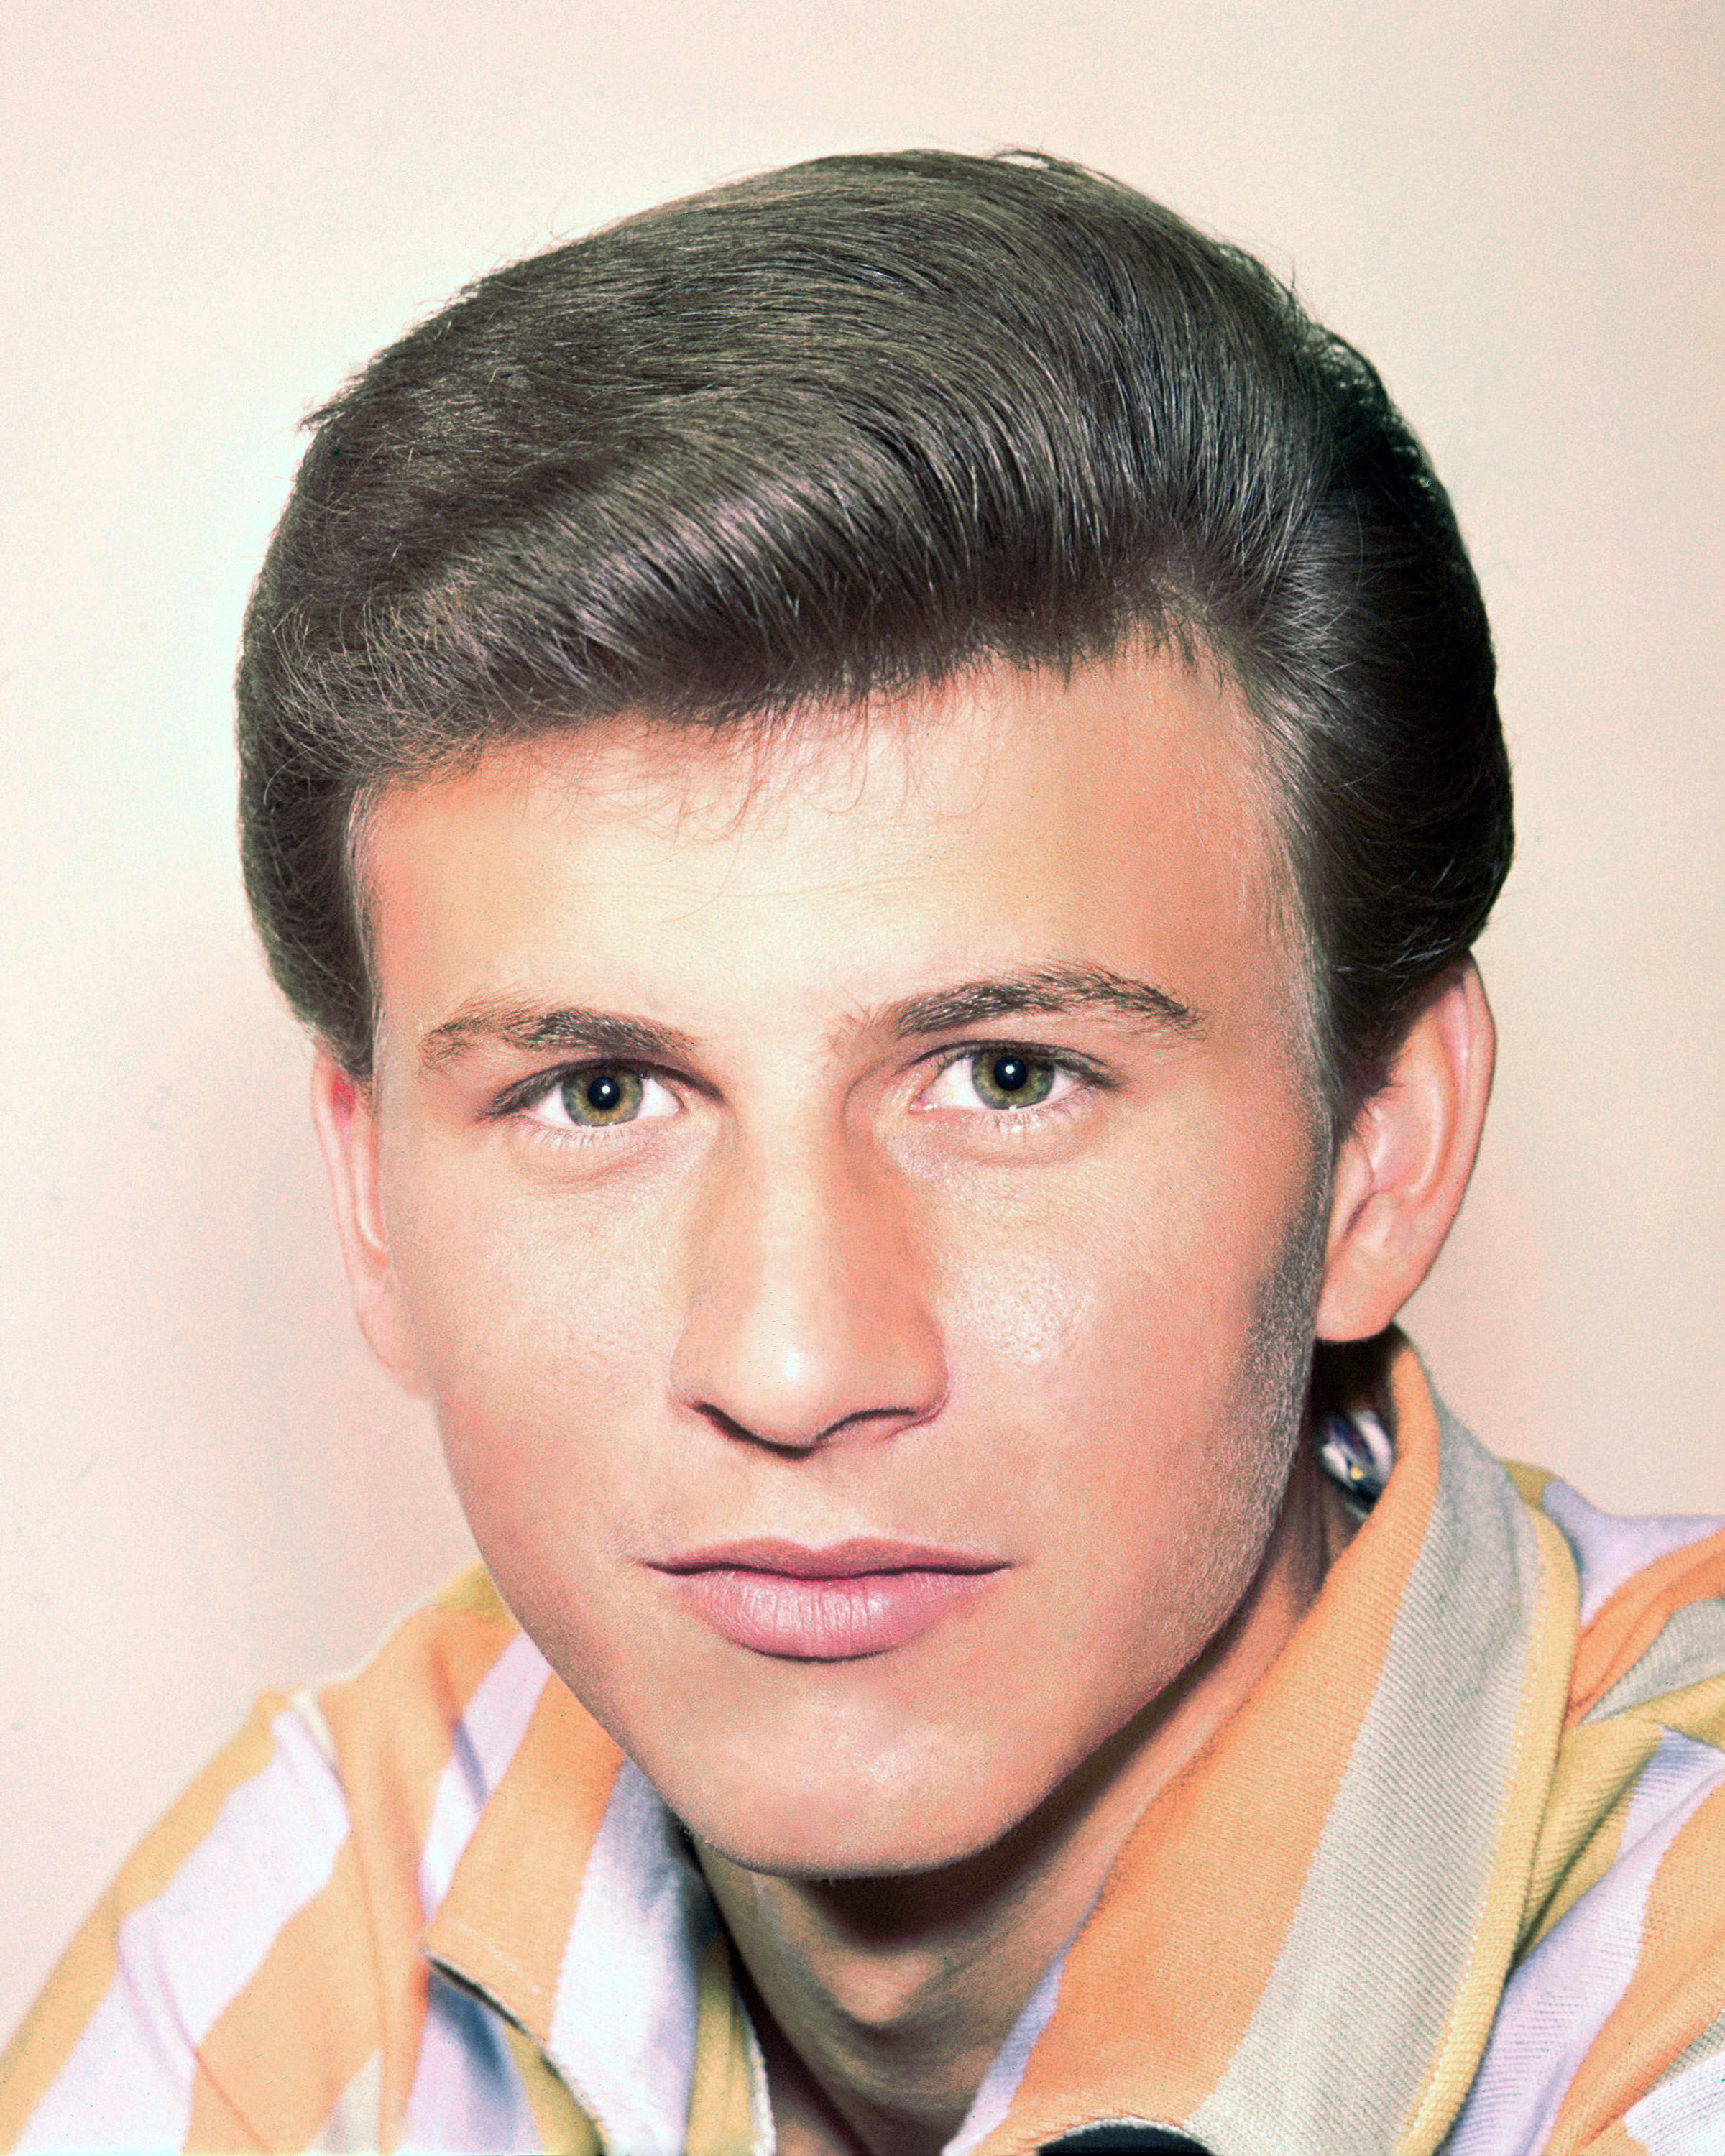 American singer and teen idol Bobby Rydell, circa 1960. | Source: Getty Images